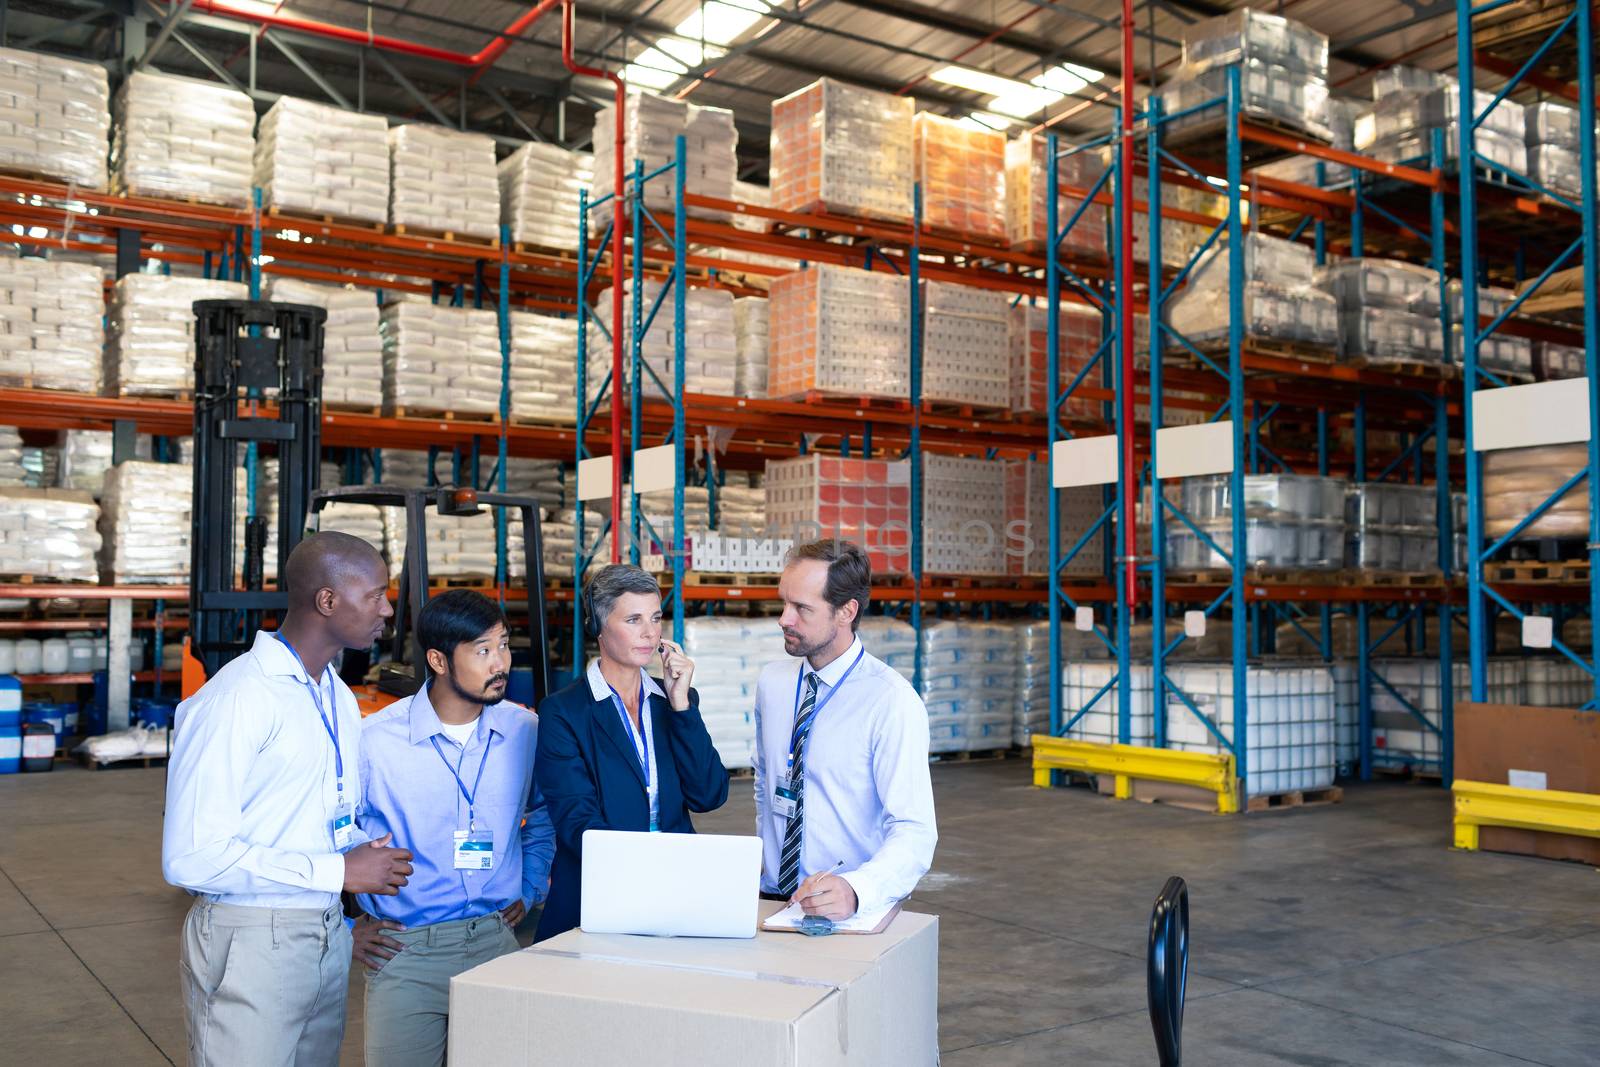 Front view of diverse staff discussing with each other in warehouse. This is a freight transportation and distribution warehouse. Industrial and industrial workers concept